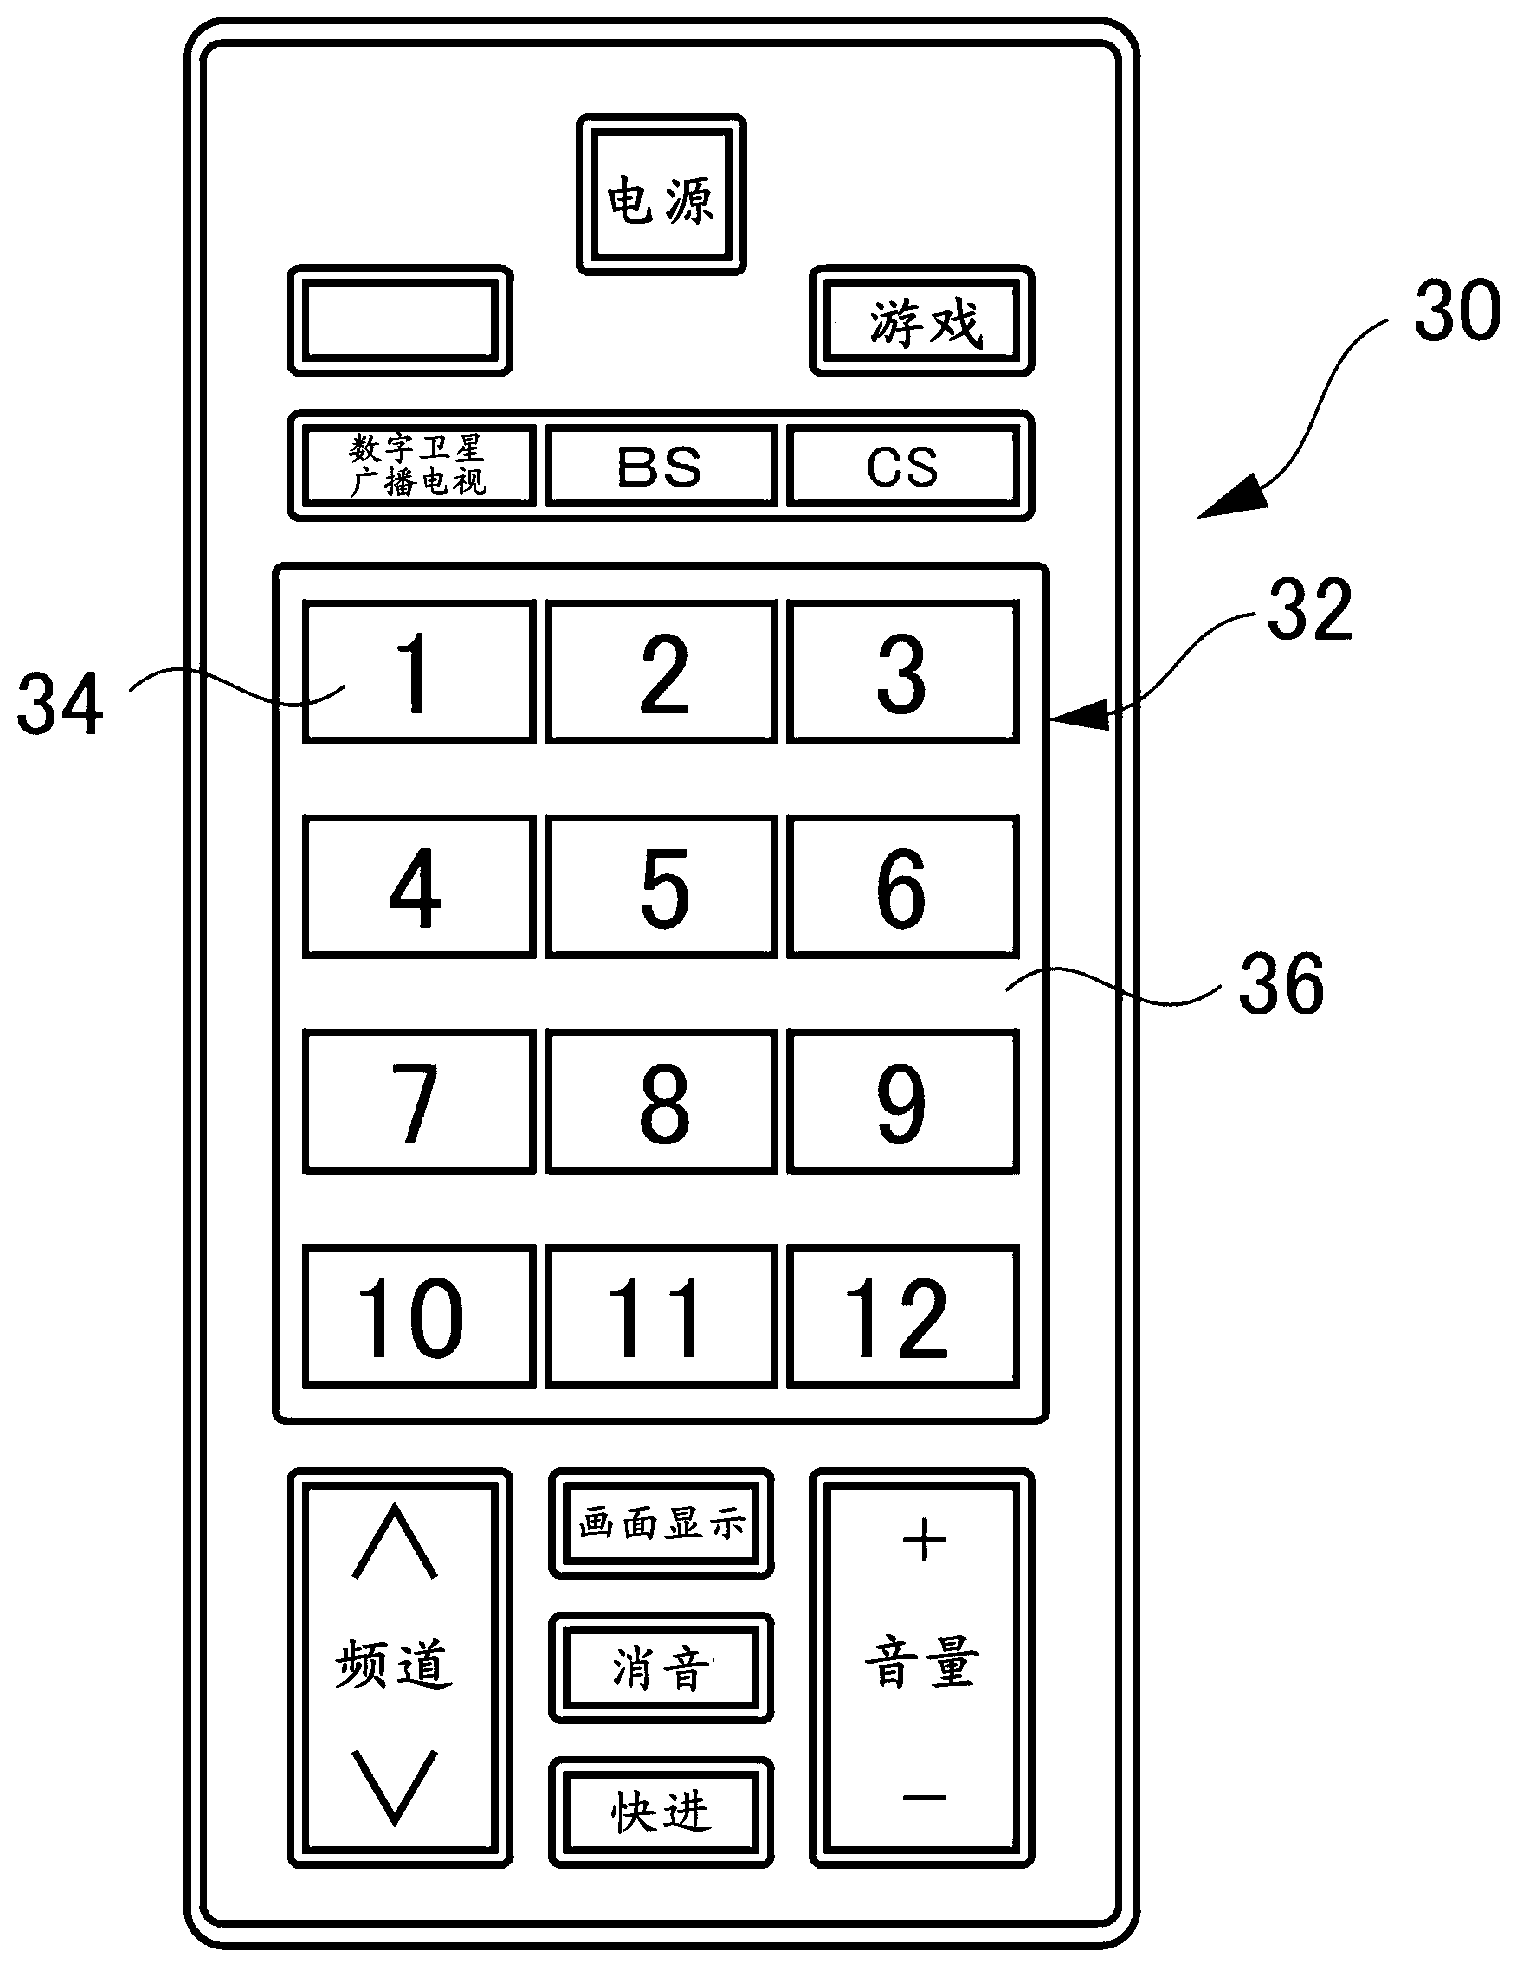 A capacitance touch panel equipped with a button switch